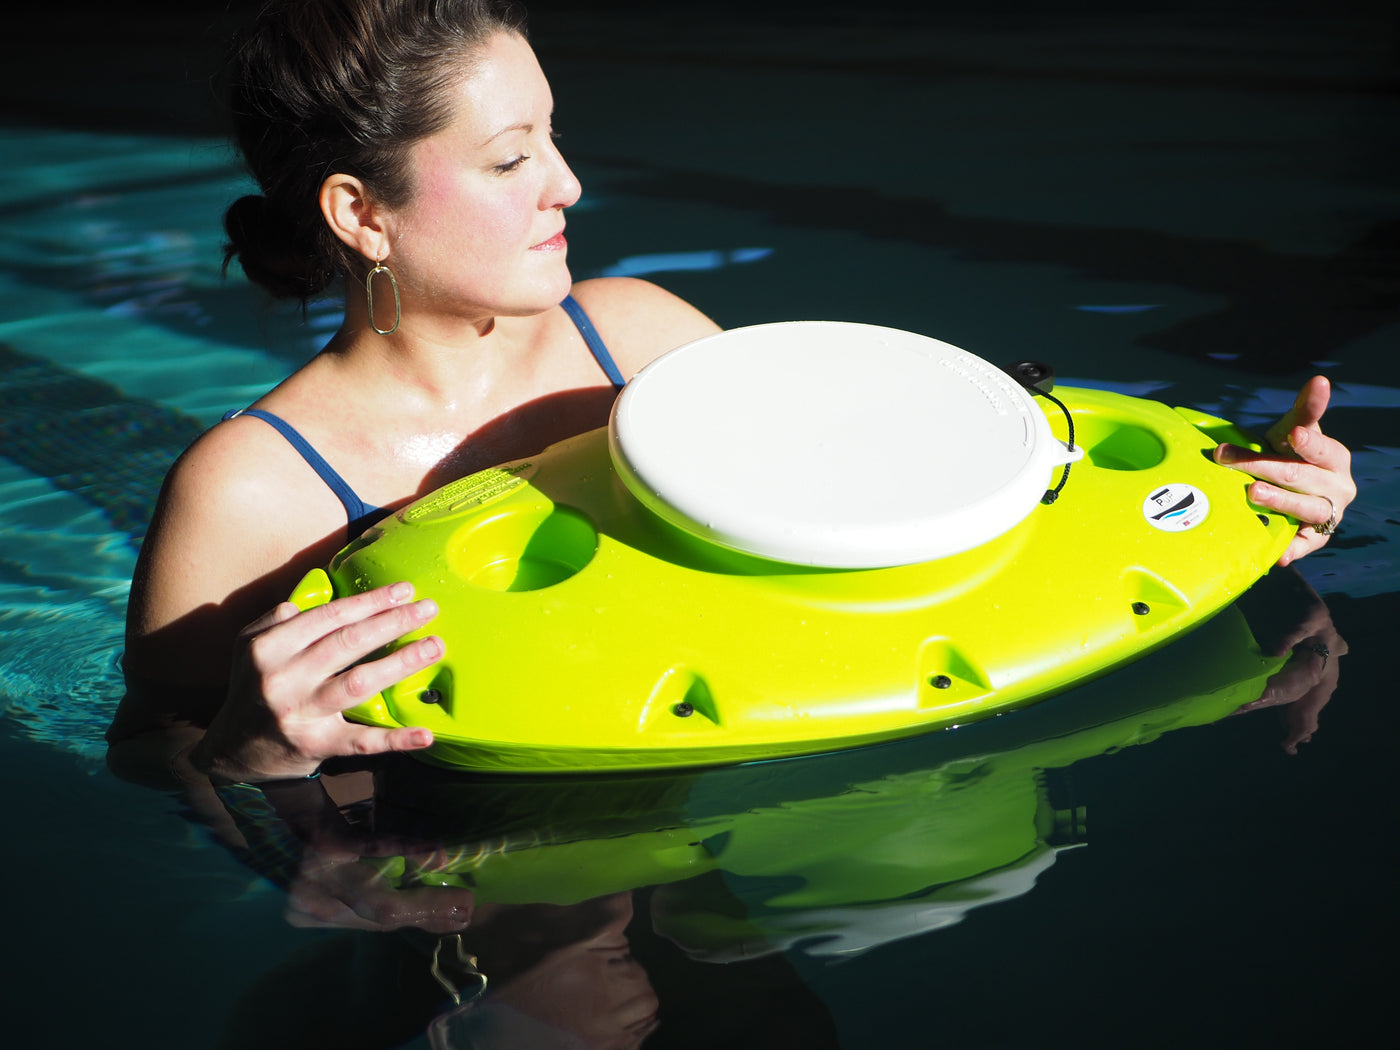 CreekKooler is an Insulated, Floating, Towable Cooler!